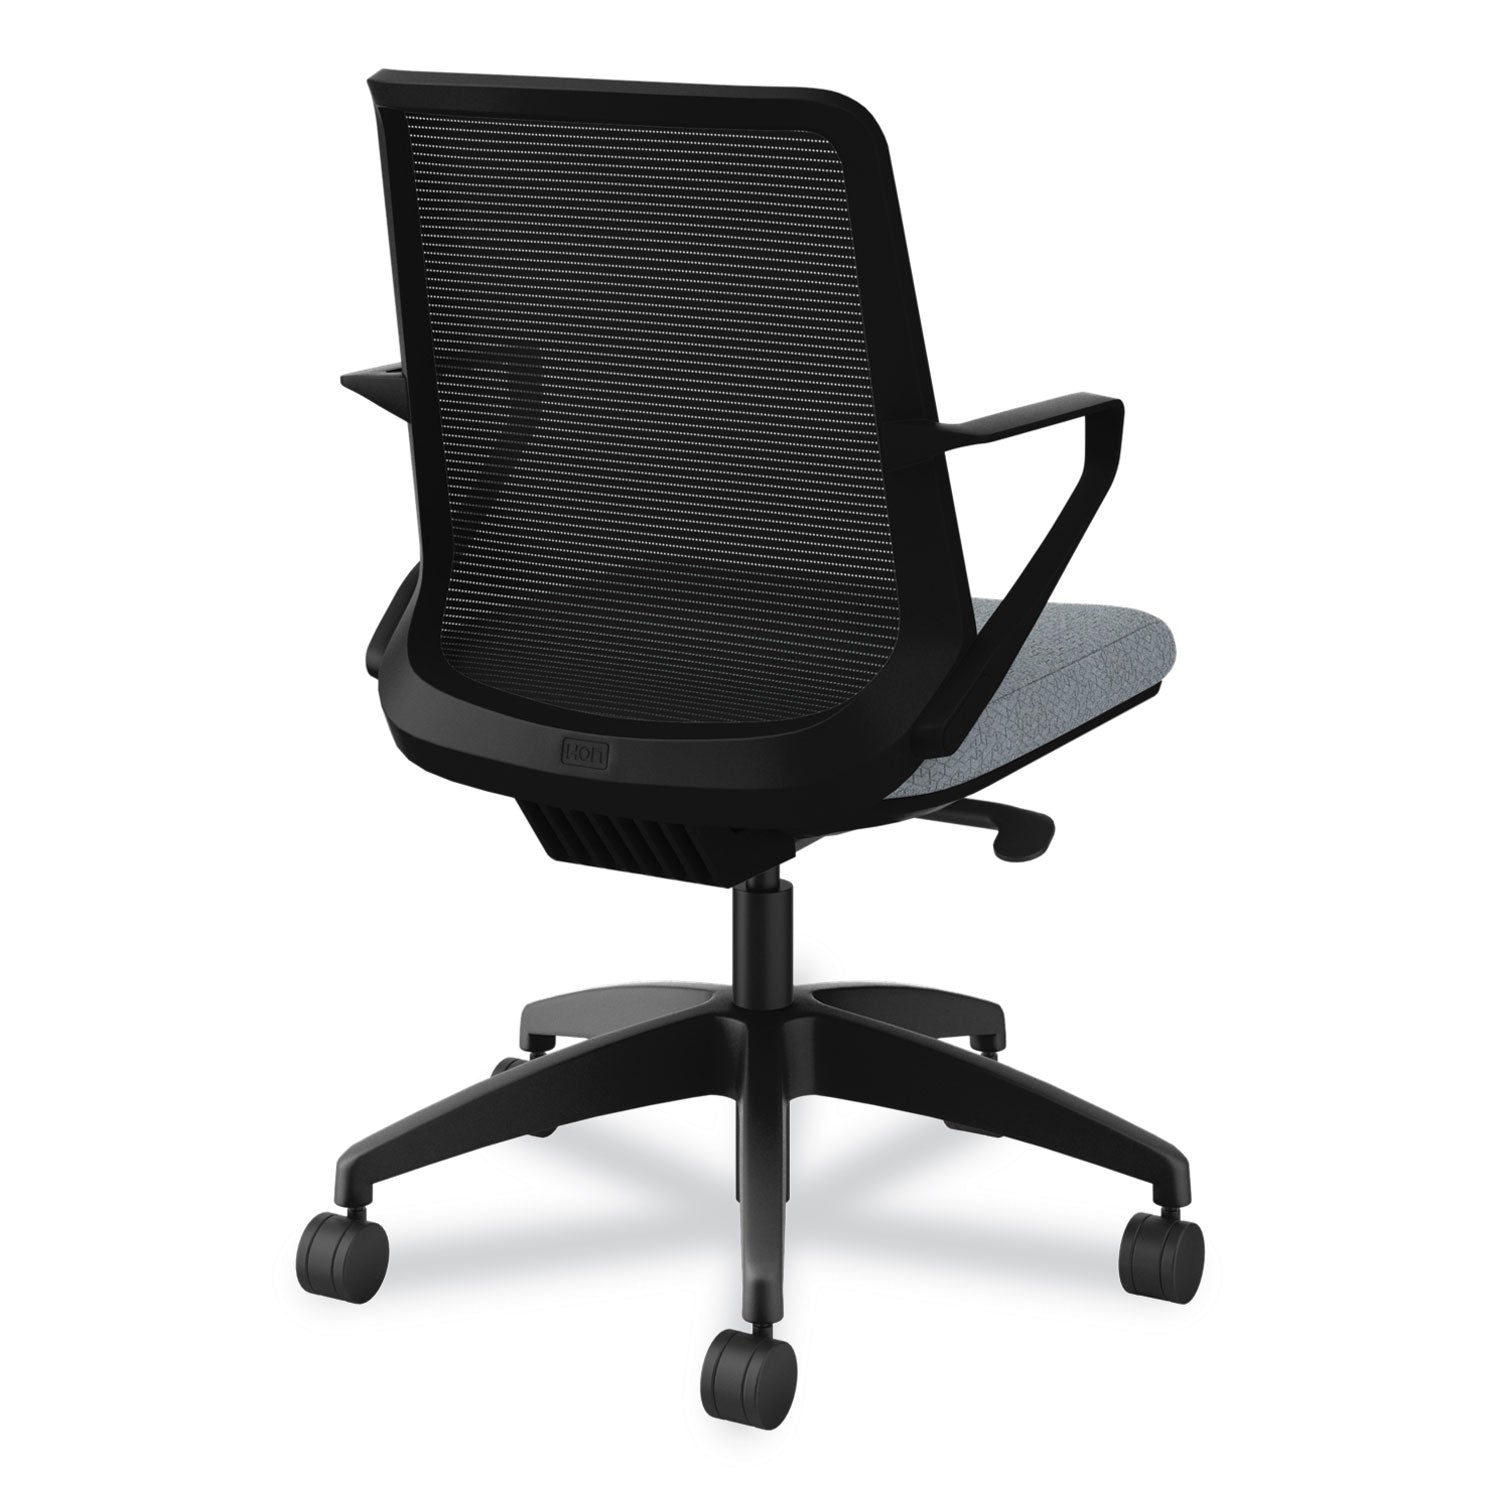 cliq-office-chair-supports-up-to-300-lb-17-to-22-seat-height-basalt-seat-black-back-base-ships-in-7-10-business-days_honclqimapx25t - 8